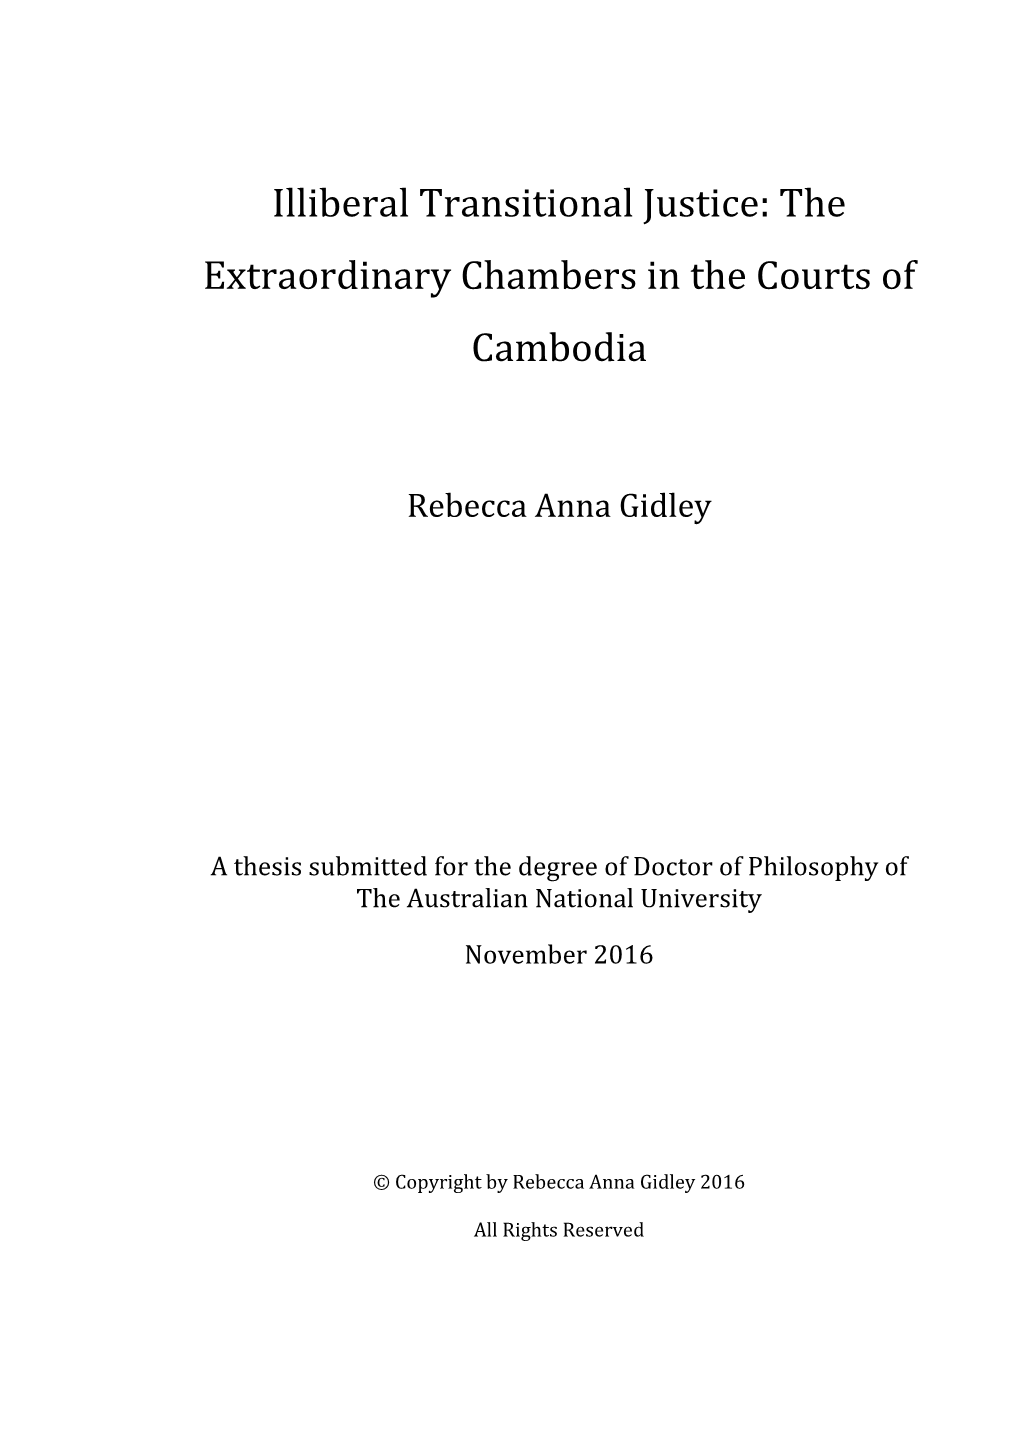 Illiberal Transitional Justice: the Extraordinary Chambers in the Courts of Cambodia